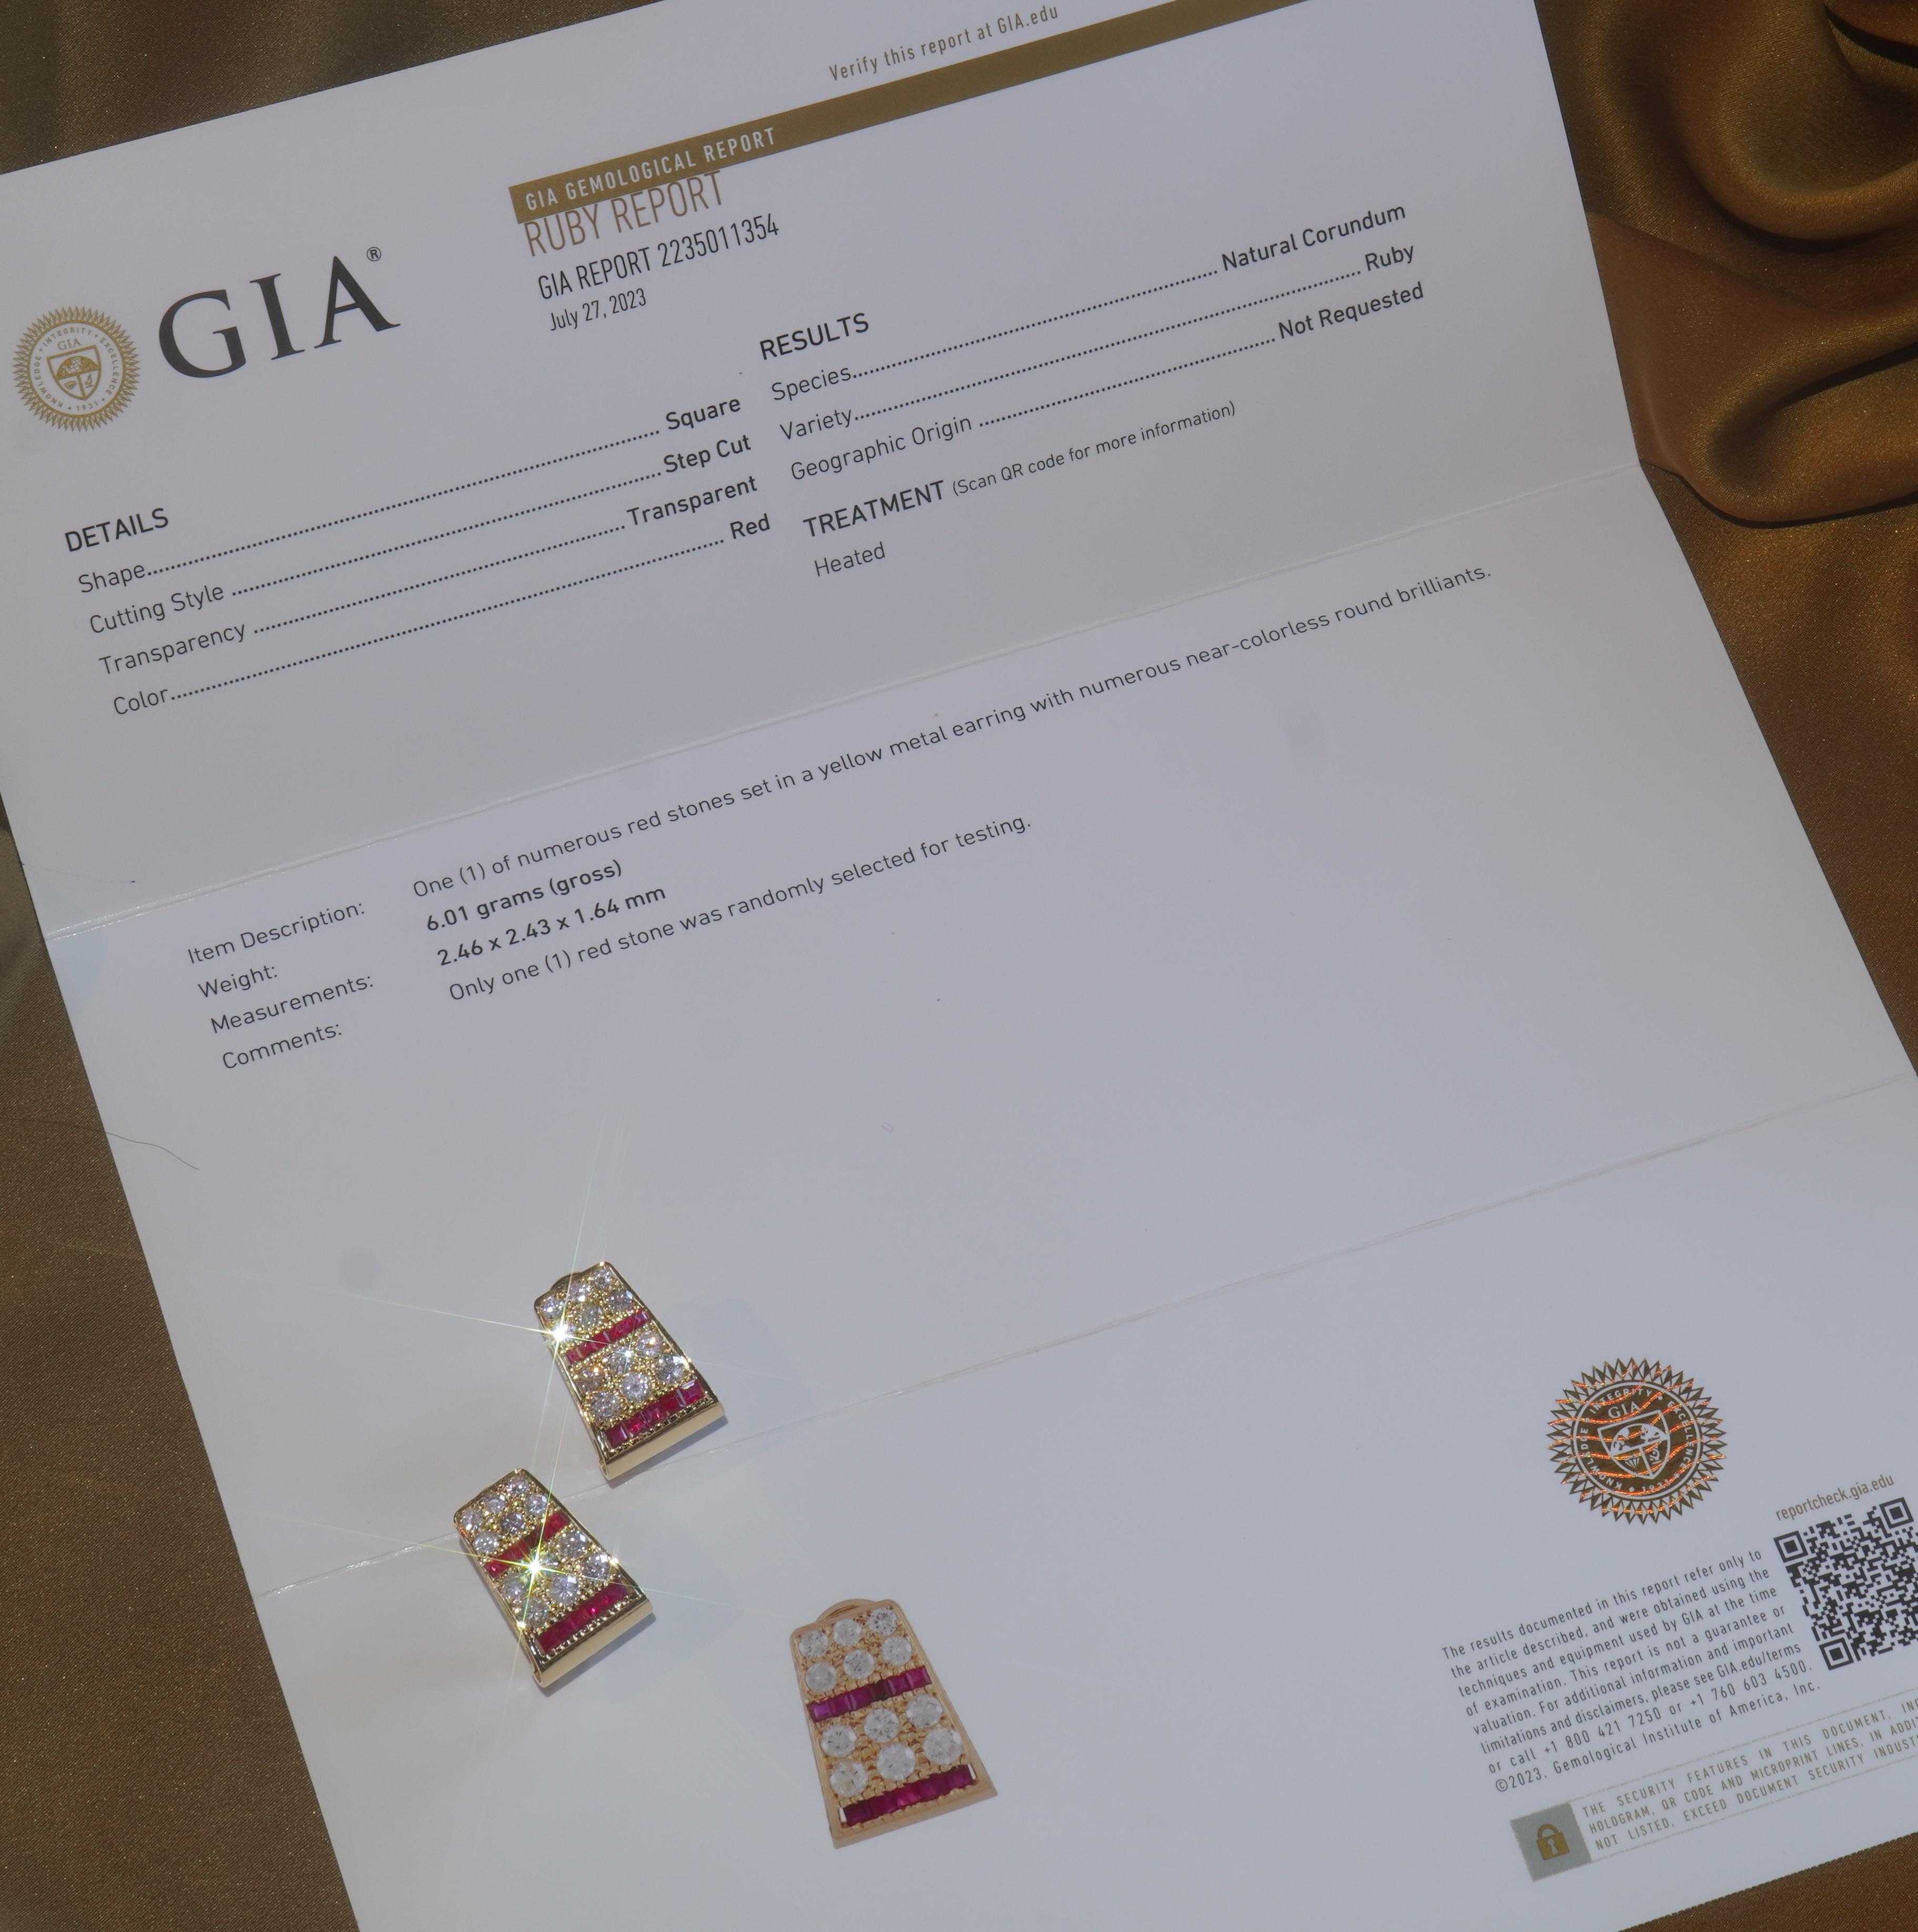 Old South Jewels proudly presents...LUXURY.  FINE GIA CERTIFIED 5.24 CARAT RUBY & DIAMOND VINTAGE 18K SOLID GOLD EARRINGS!  BREATHTAKING NATURAL GEMSTONES.  CROWNED WITH VS SPARKLING DIAMONDS. FINE VINTAGE EARRINGS ARE SOLID HEAVY 18K YELLOW GOLD.  